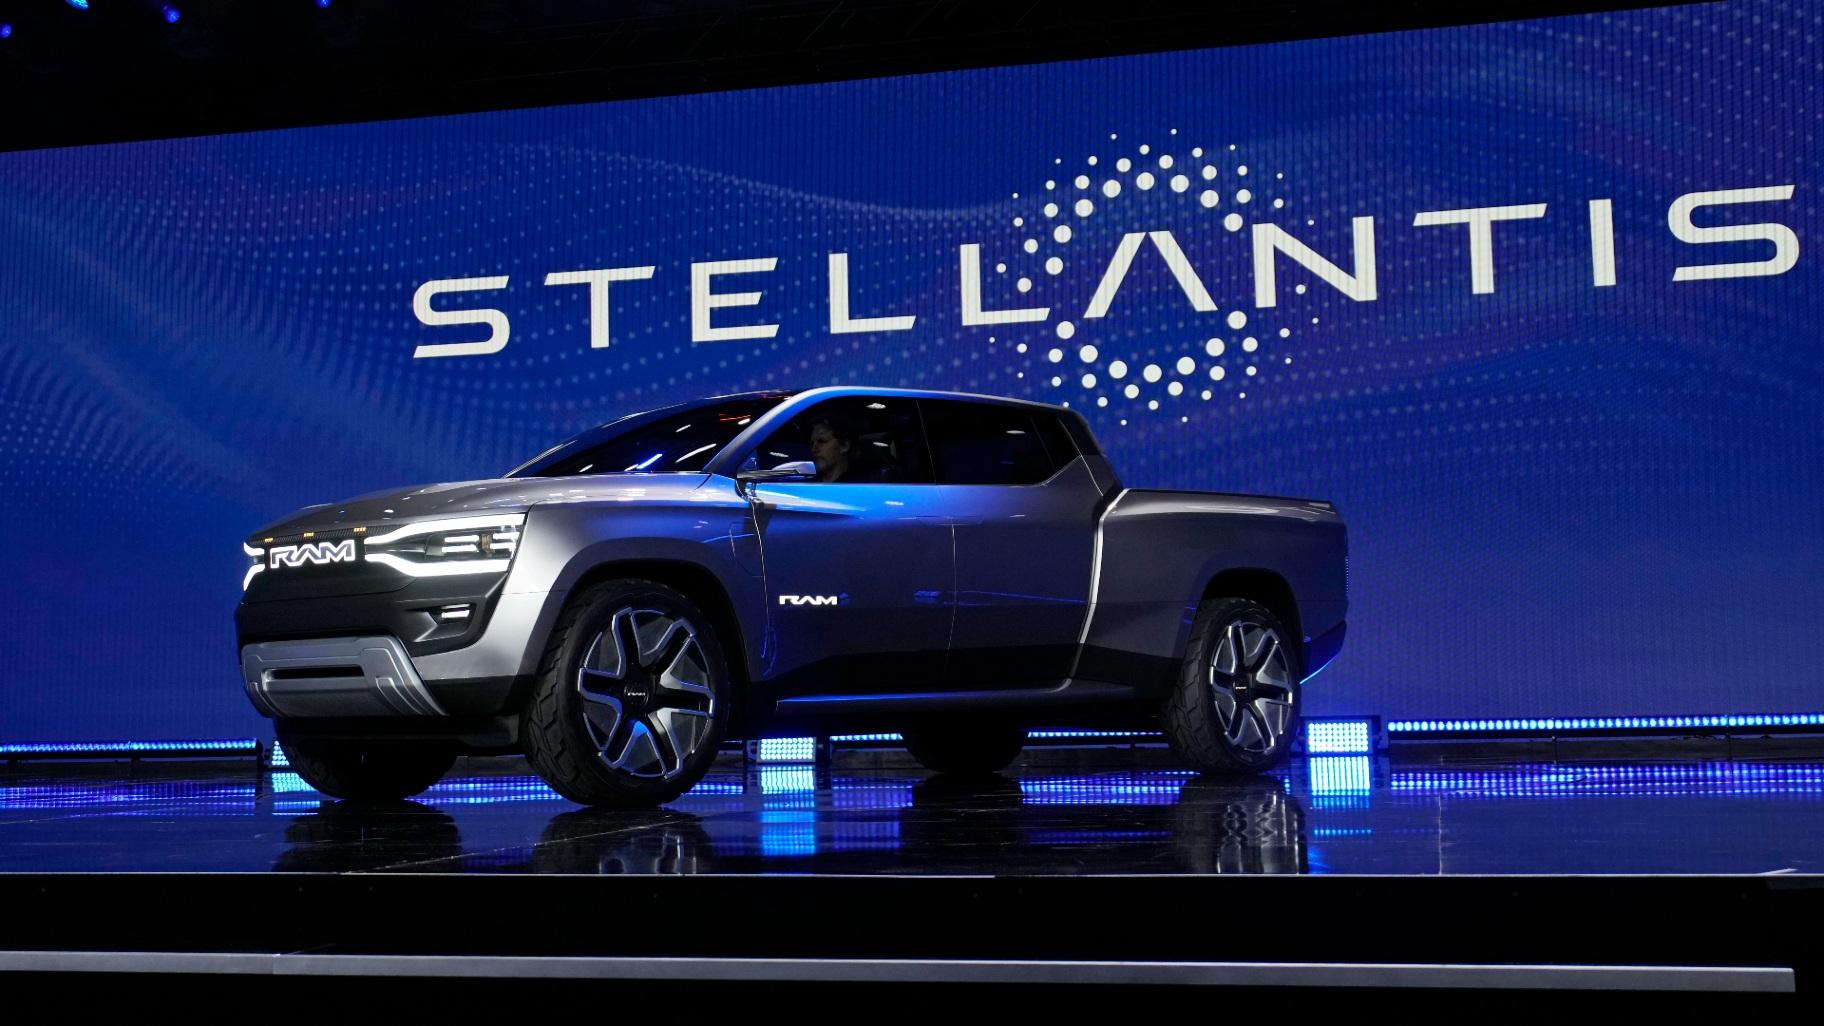 FILE - The Ram 1500 Revolution electric battery powered pickup truck is displayed during the Stellantis keynote at the CES tech show Thursday, Jan. 5, 2023, in Las Vegas. (AP Photo / John Locher, File)